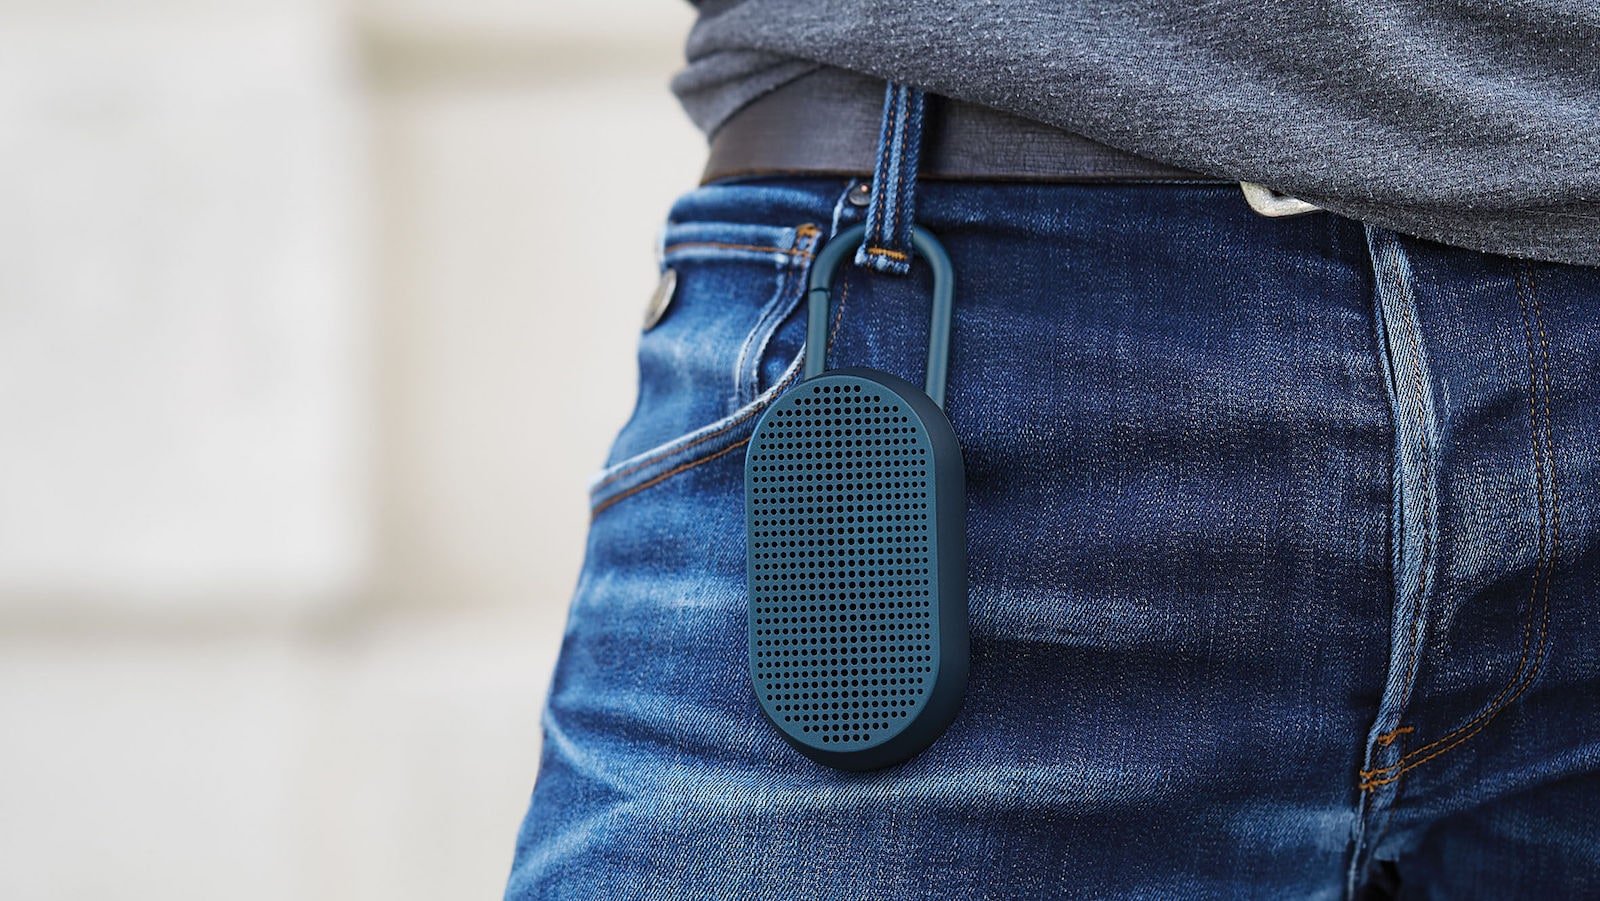 Lexon Mino T Bluetooth speaker with an integrated carabiner clips to clothes, bags, & more